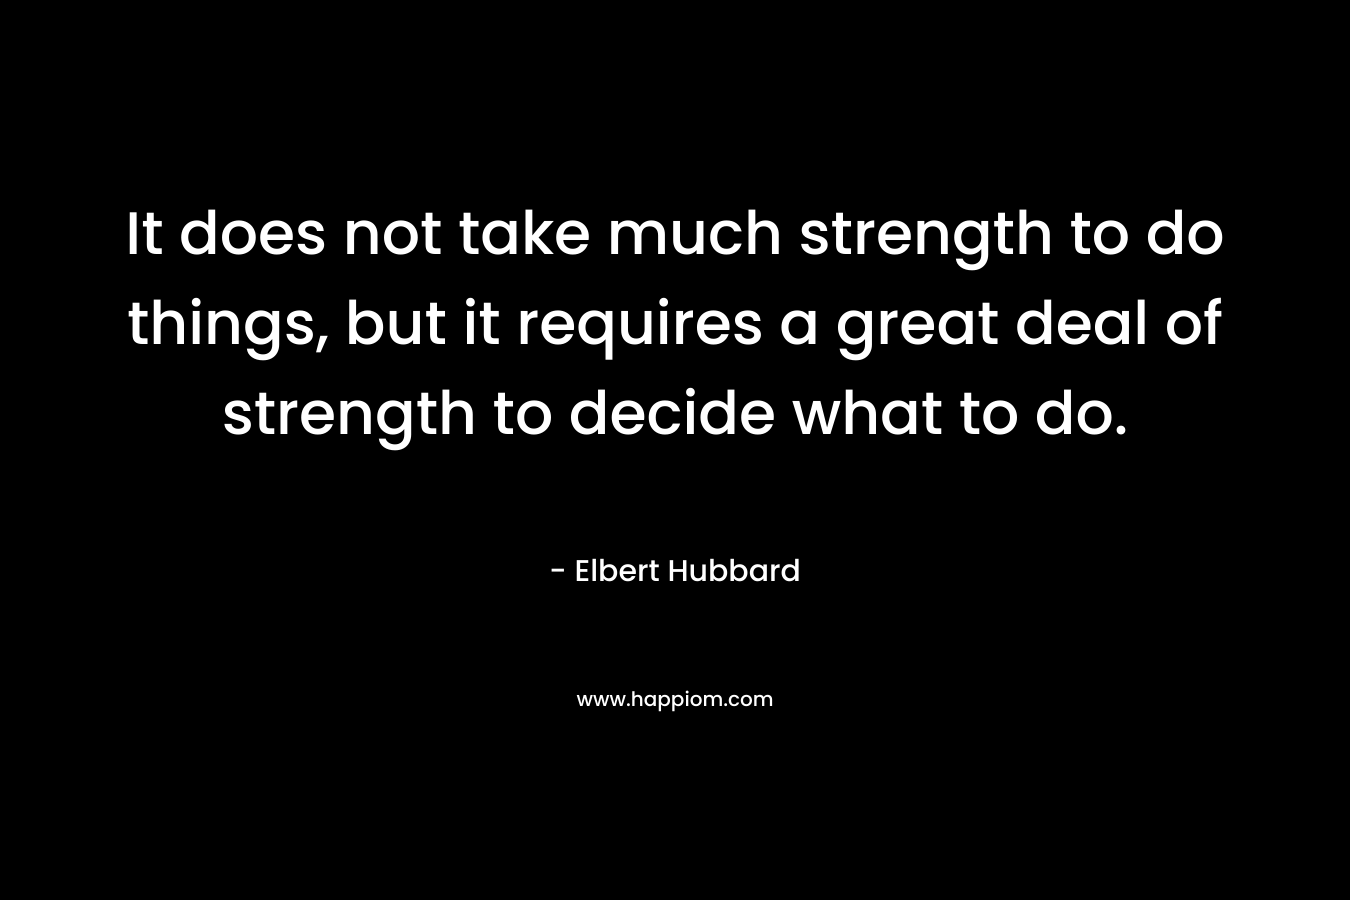 It does not take much strength to do things, but it requires a great deal of strength to decide what to do. – Elbert Hubbard